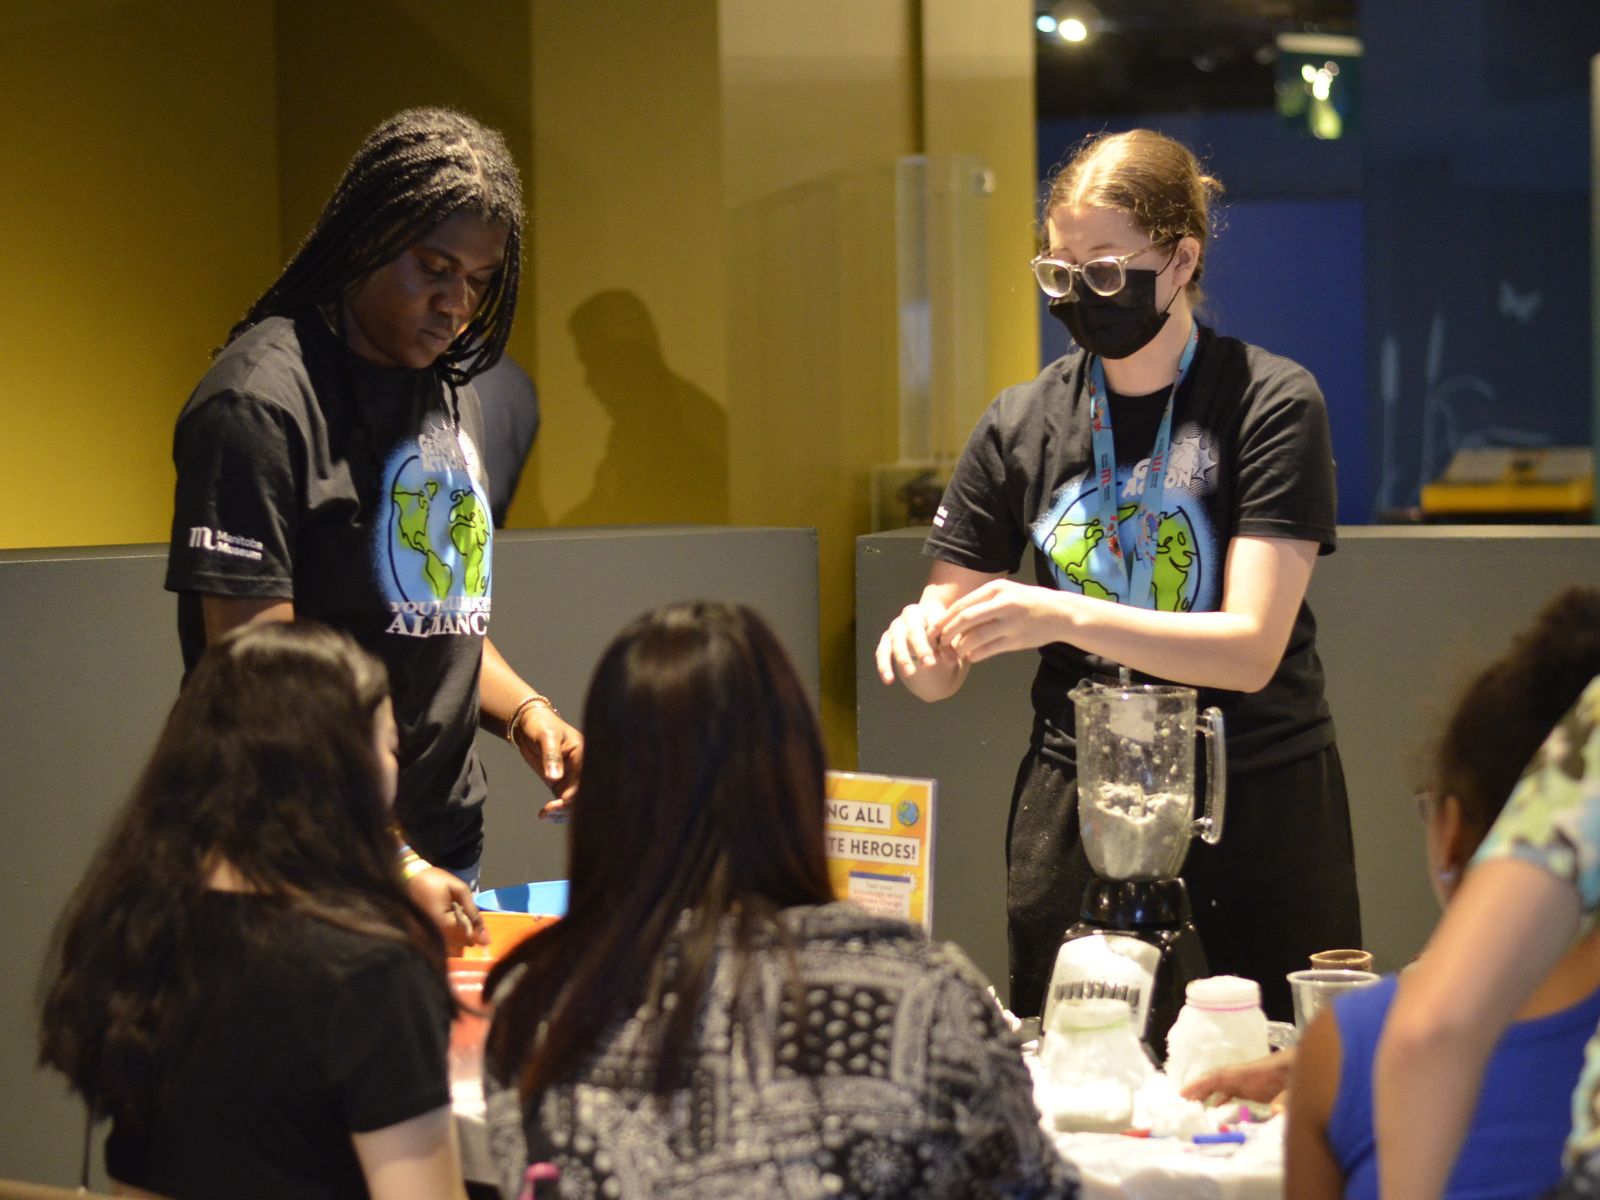 Two youth running a pop-up exhibit in the Science Gallery for two visitors. Both youth are wearing matching t-shirts with an illustrated globe and the words “GenAction! / Youth Climate / Alliance” and a Manitoba Musuem logo on the sleeve.